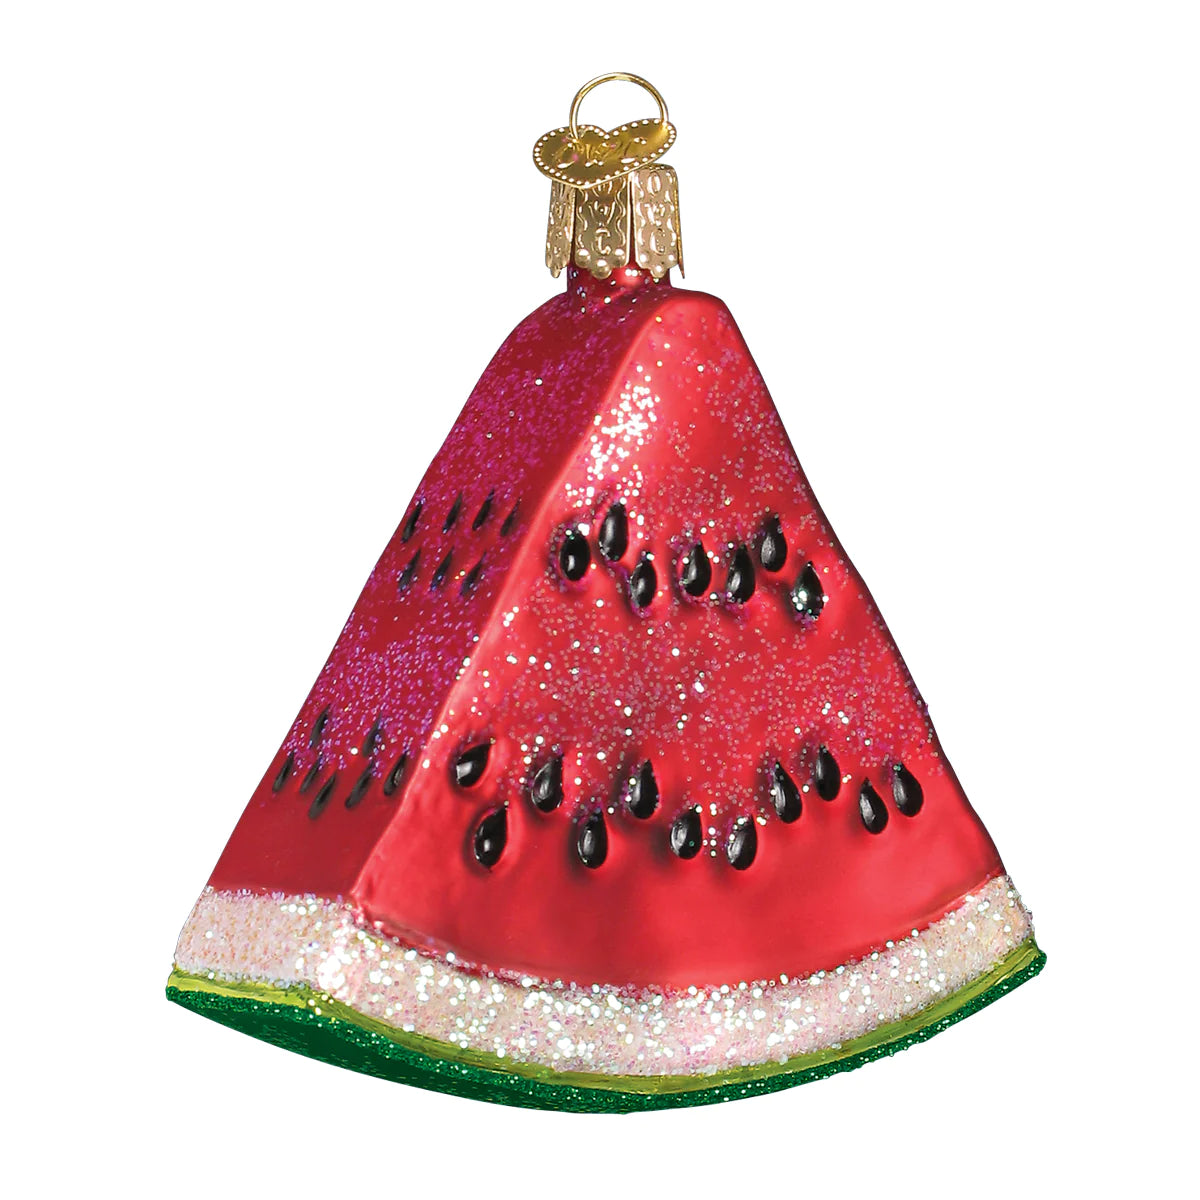 Watermelon Wedge Ornament  Old World Christmas   